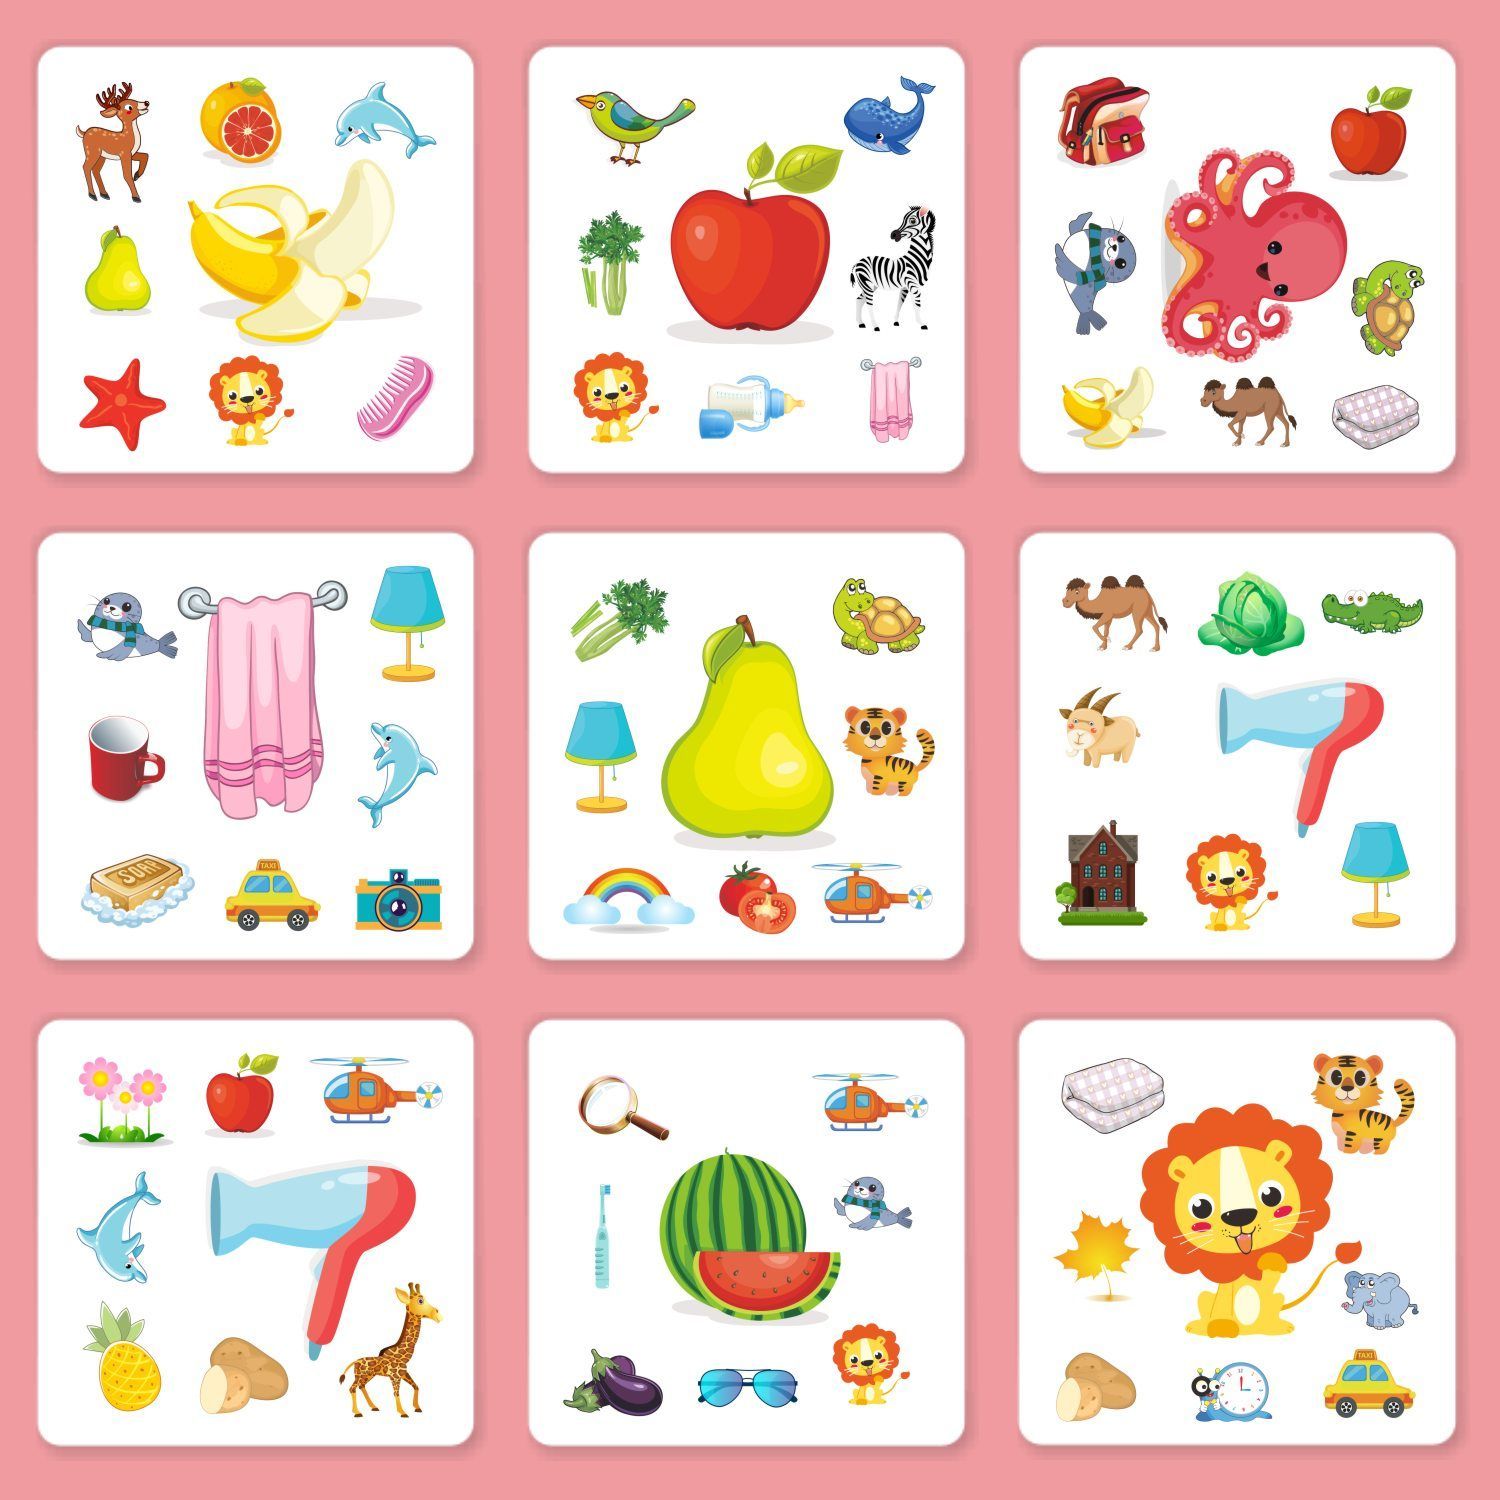 Match-up Lianliankan Children's Educational Thinking Training Card Memory Card Early Education Parent-Child Interactive Family Game